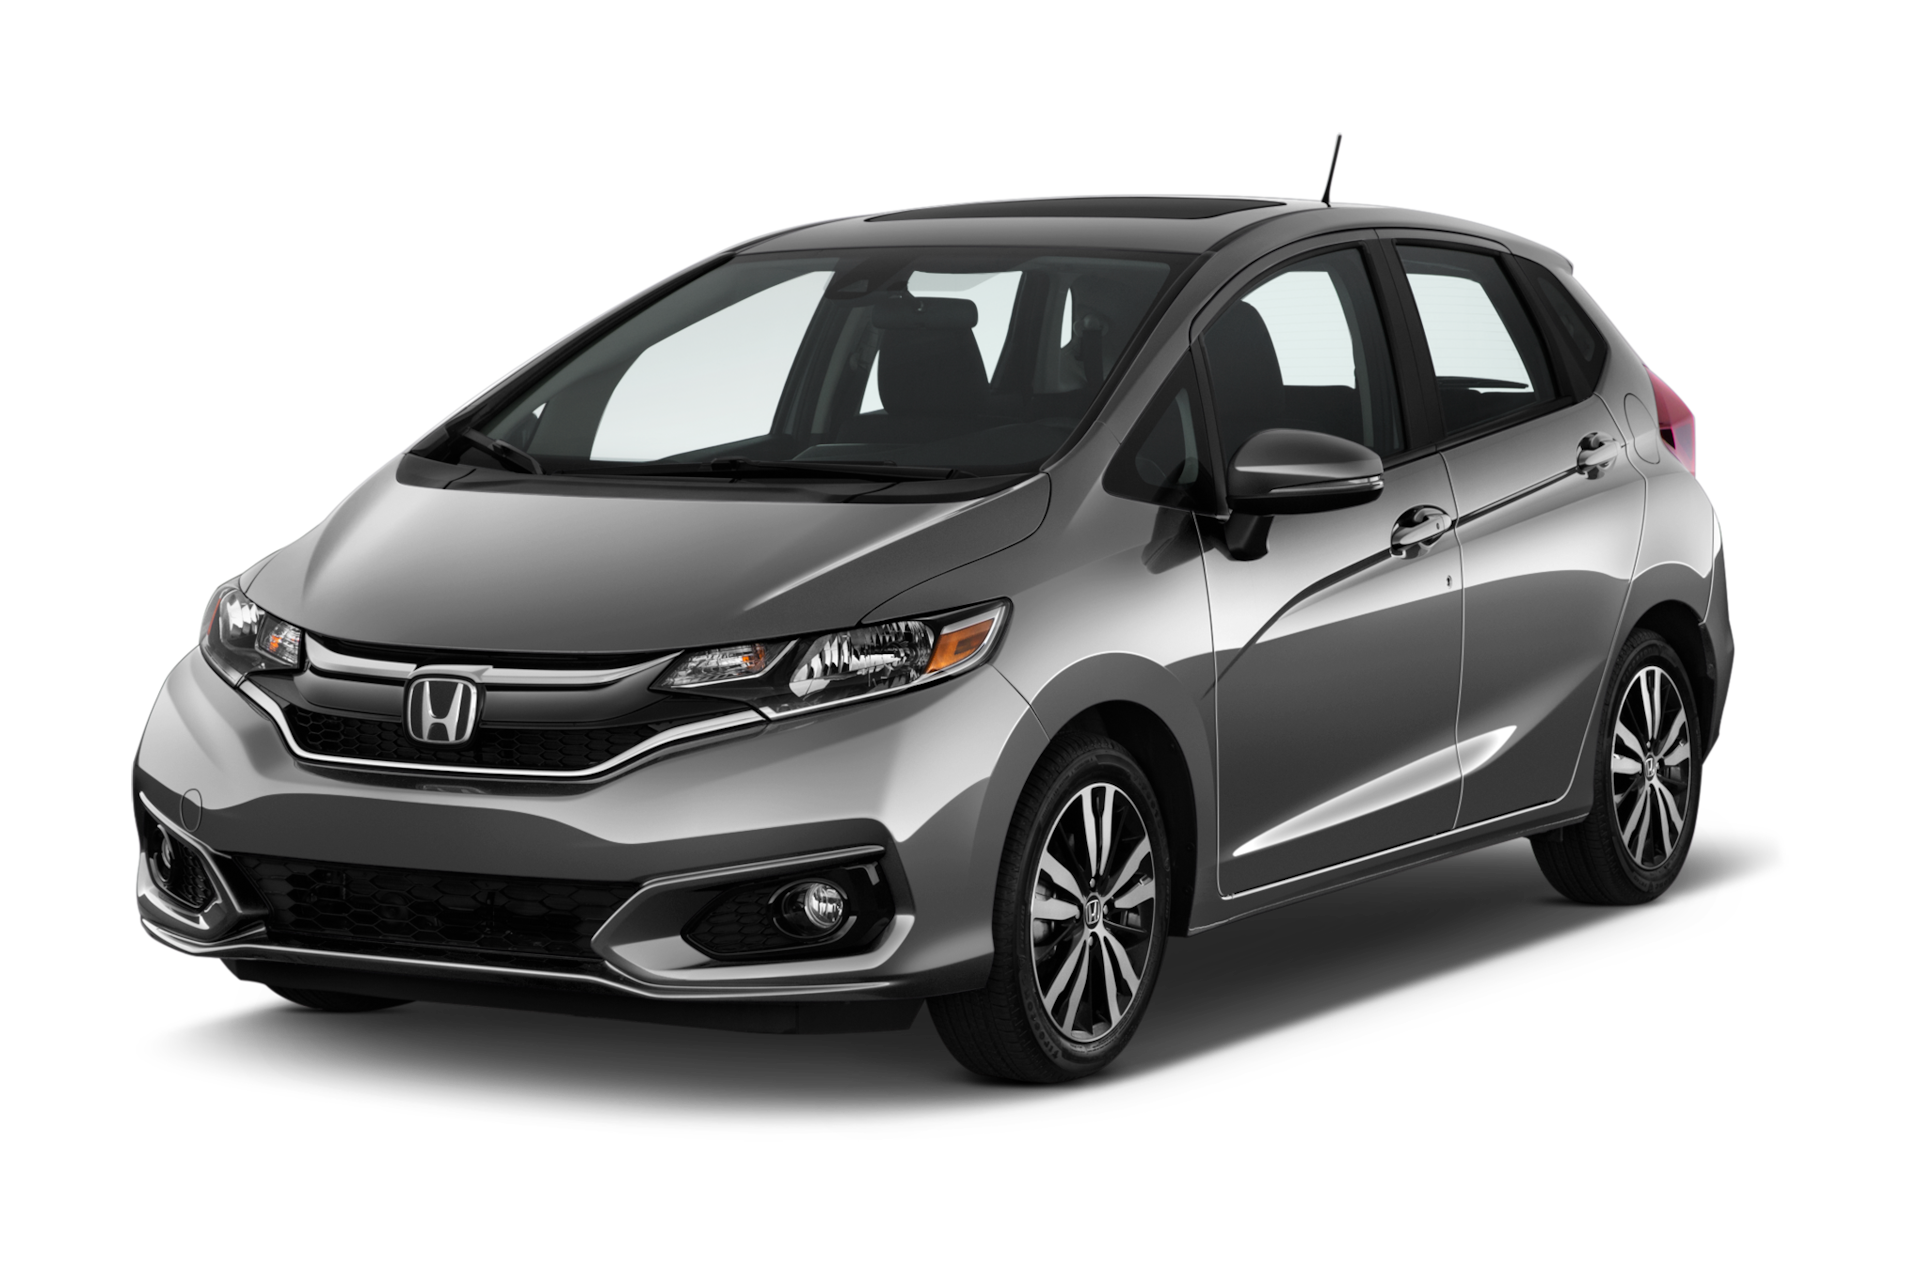 2020 Honda Fit Prices, Reviews, and Photos - MotorTrend